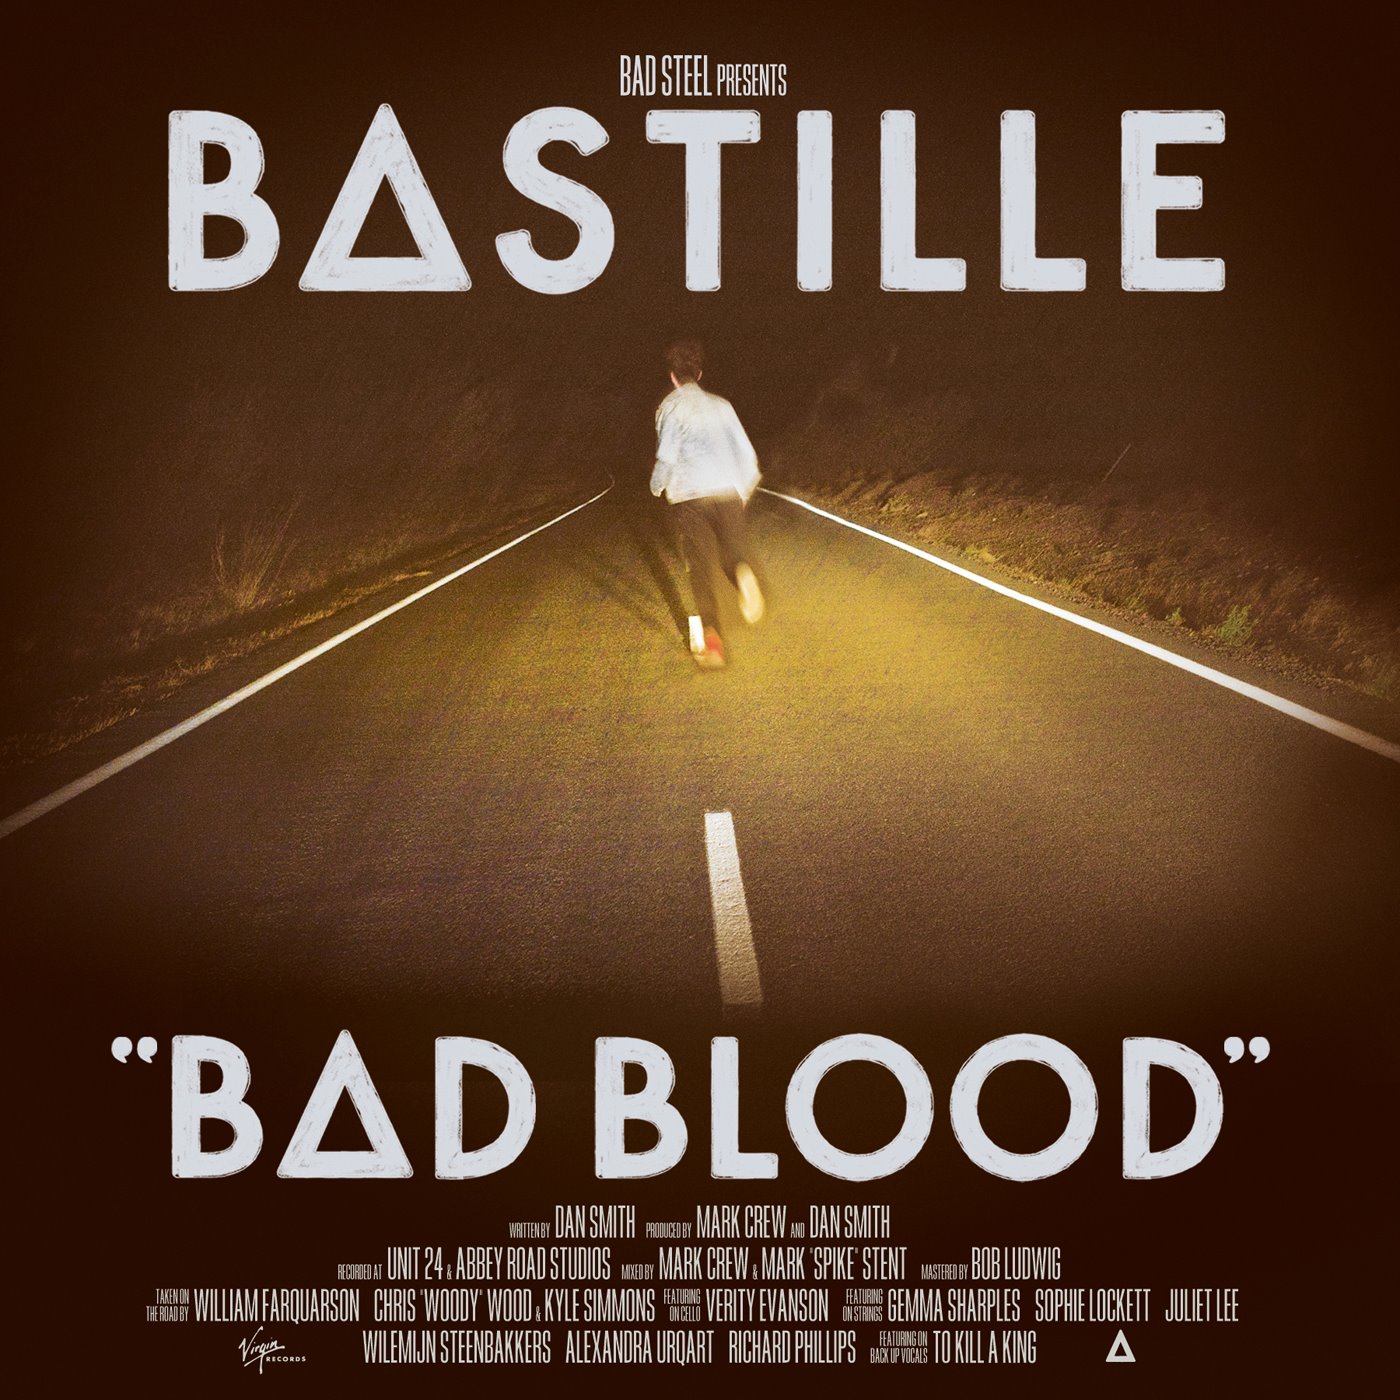 News Added Oct 26, 2012 Bastille started out as a solo project by singer-songwriter Dan Smith in 2010 but is now a four piece after Smith, who was born on the French national holiday of Bastille Day - hence the band name - was joined by Chris 'Woody' Wood, Will Farquarson and Kyle Simmons. Bastille […]